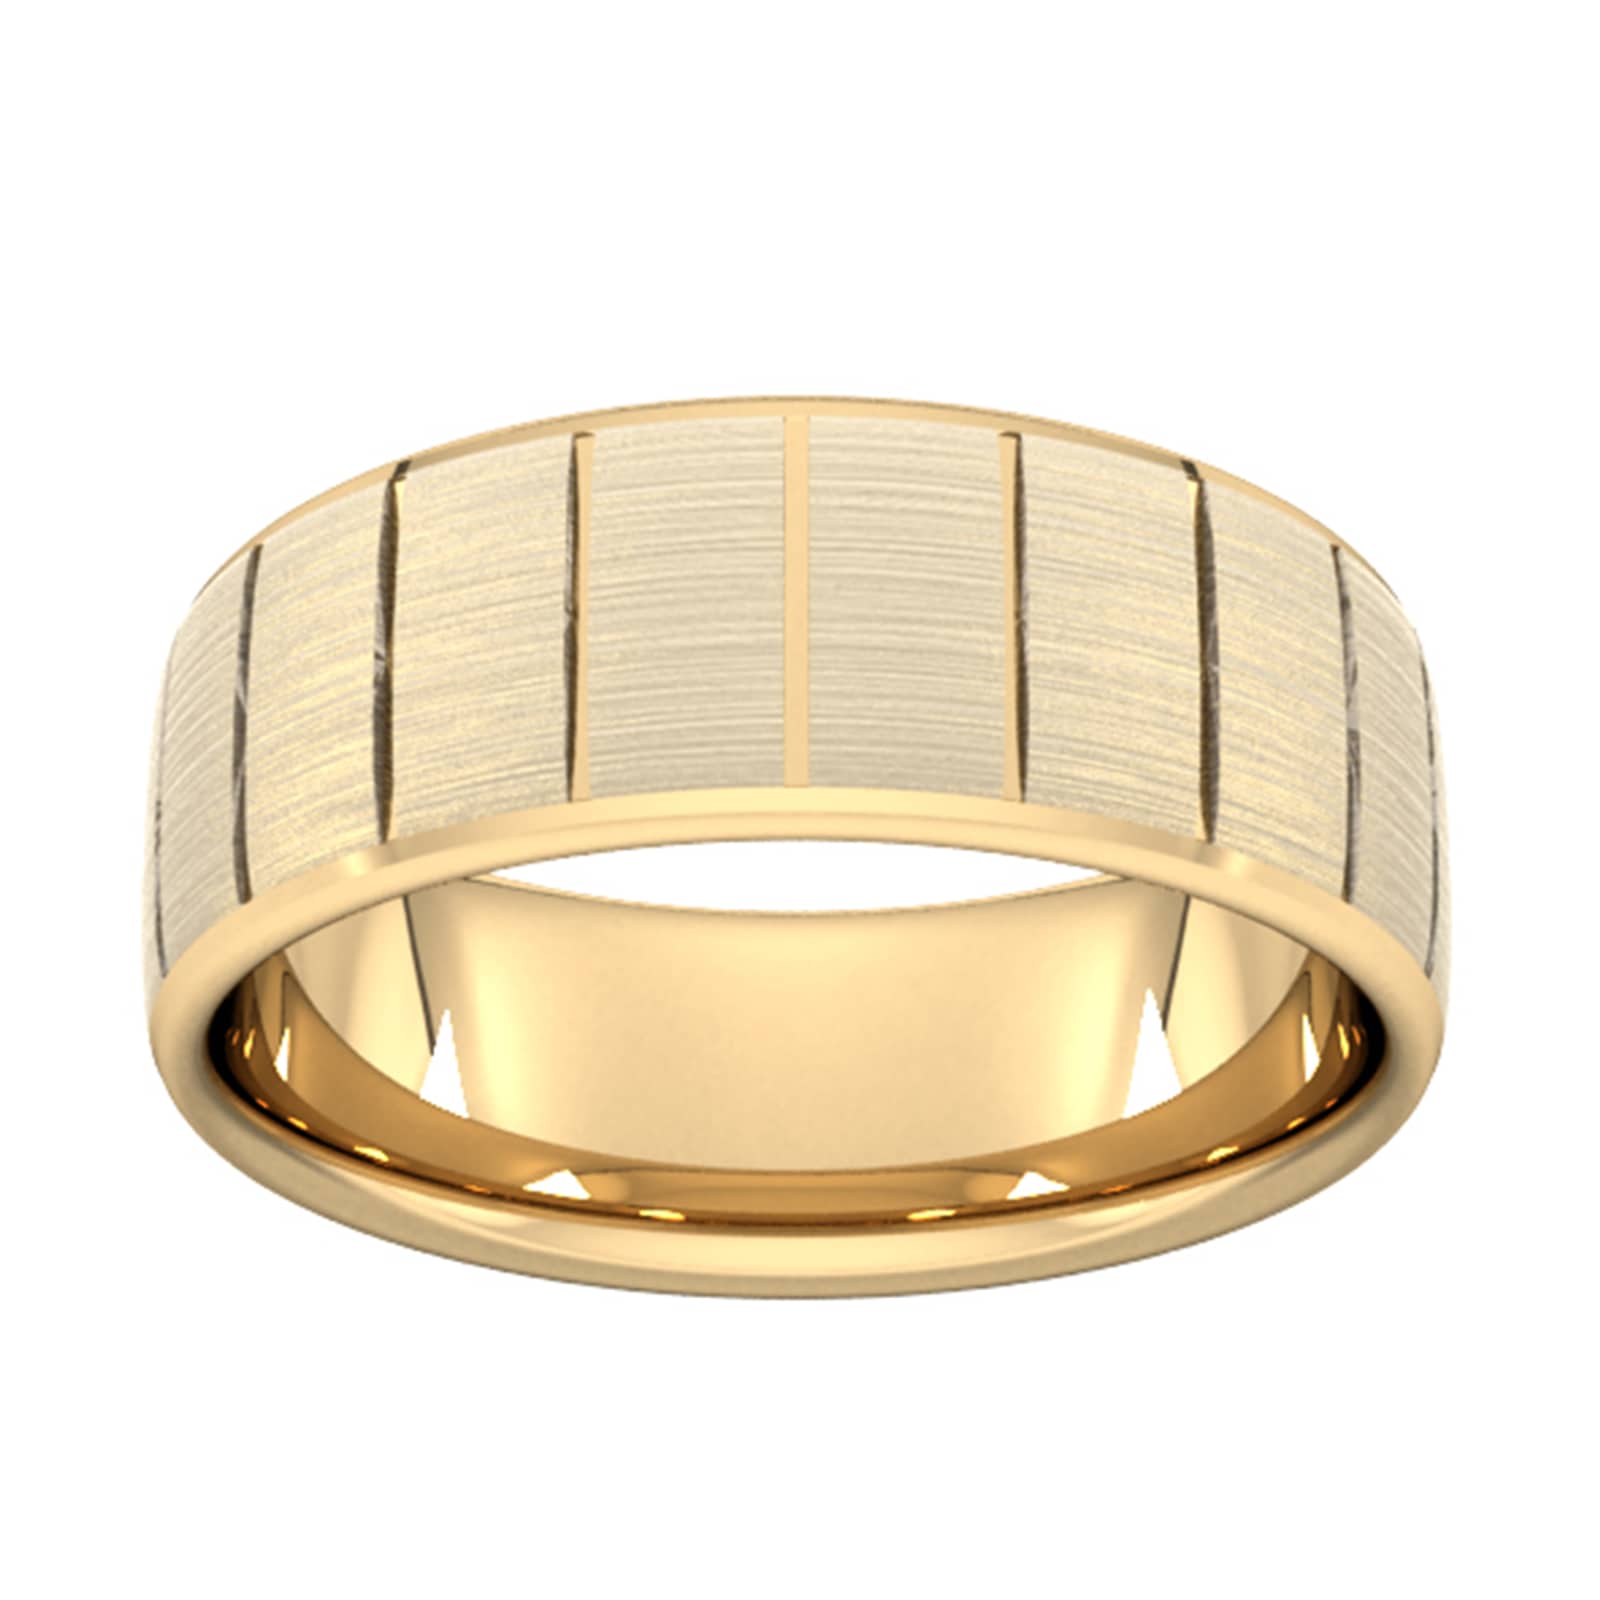 8mm Slight Court Standard Vertical Lines Wedding Ring In 18 Carat Yellow Gold - Ring Size V